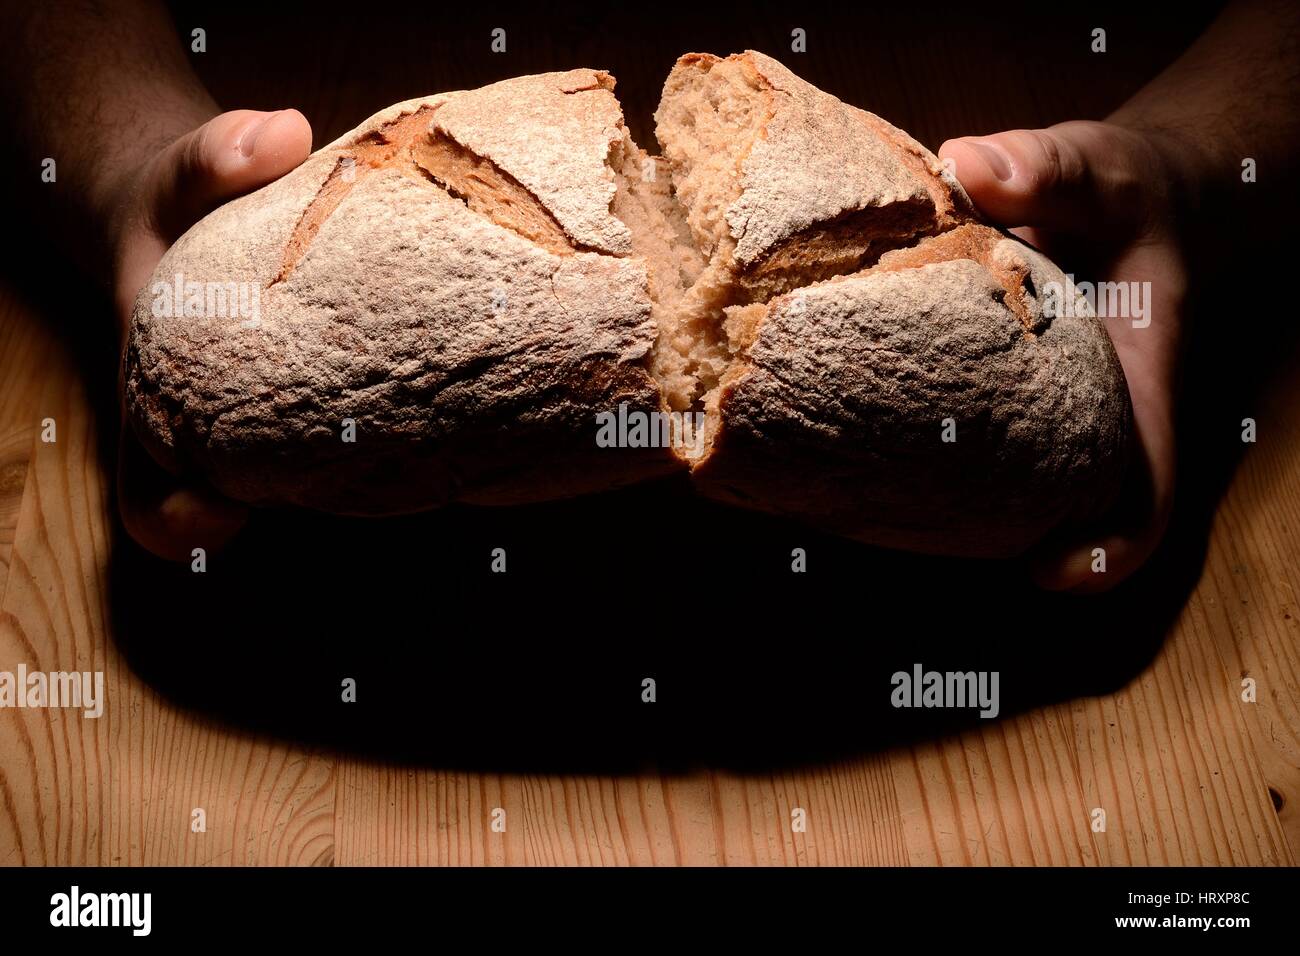 Breaking bread on a wooden table dark background Stock Photo